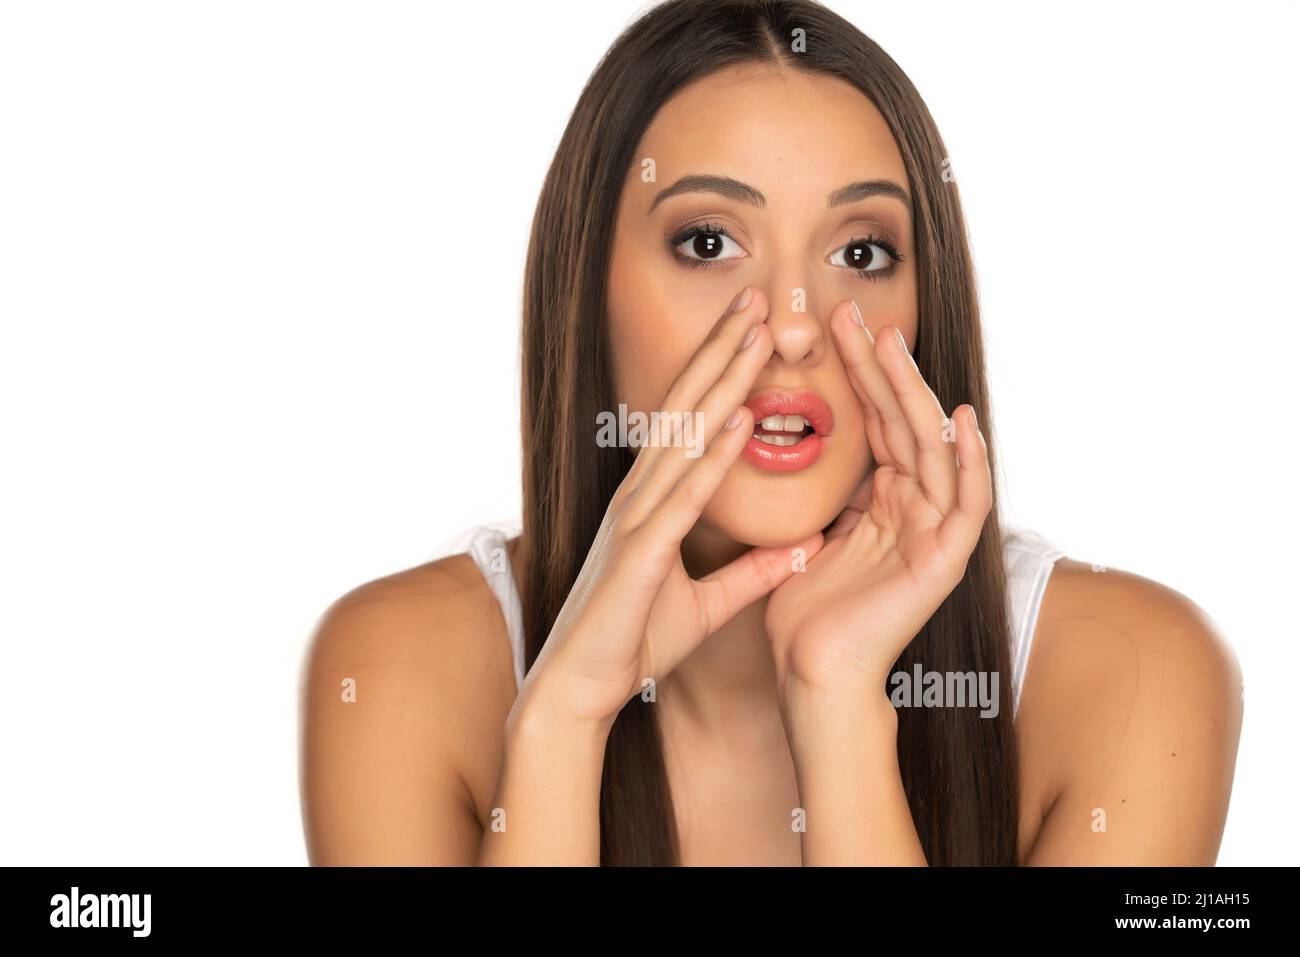 Young woman is holding hands near mouth and telling a secret on a white background Stock Photo